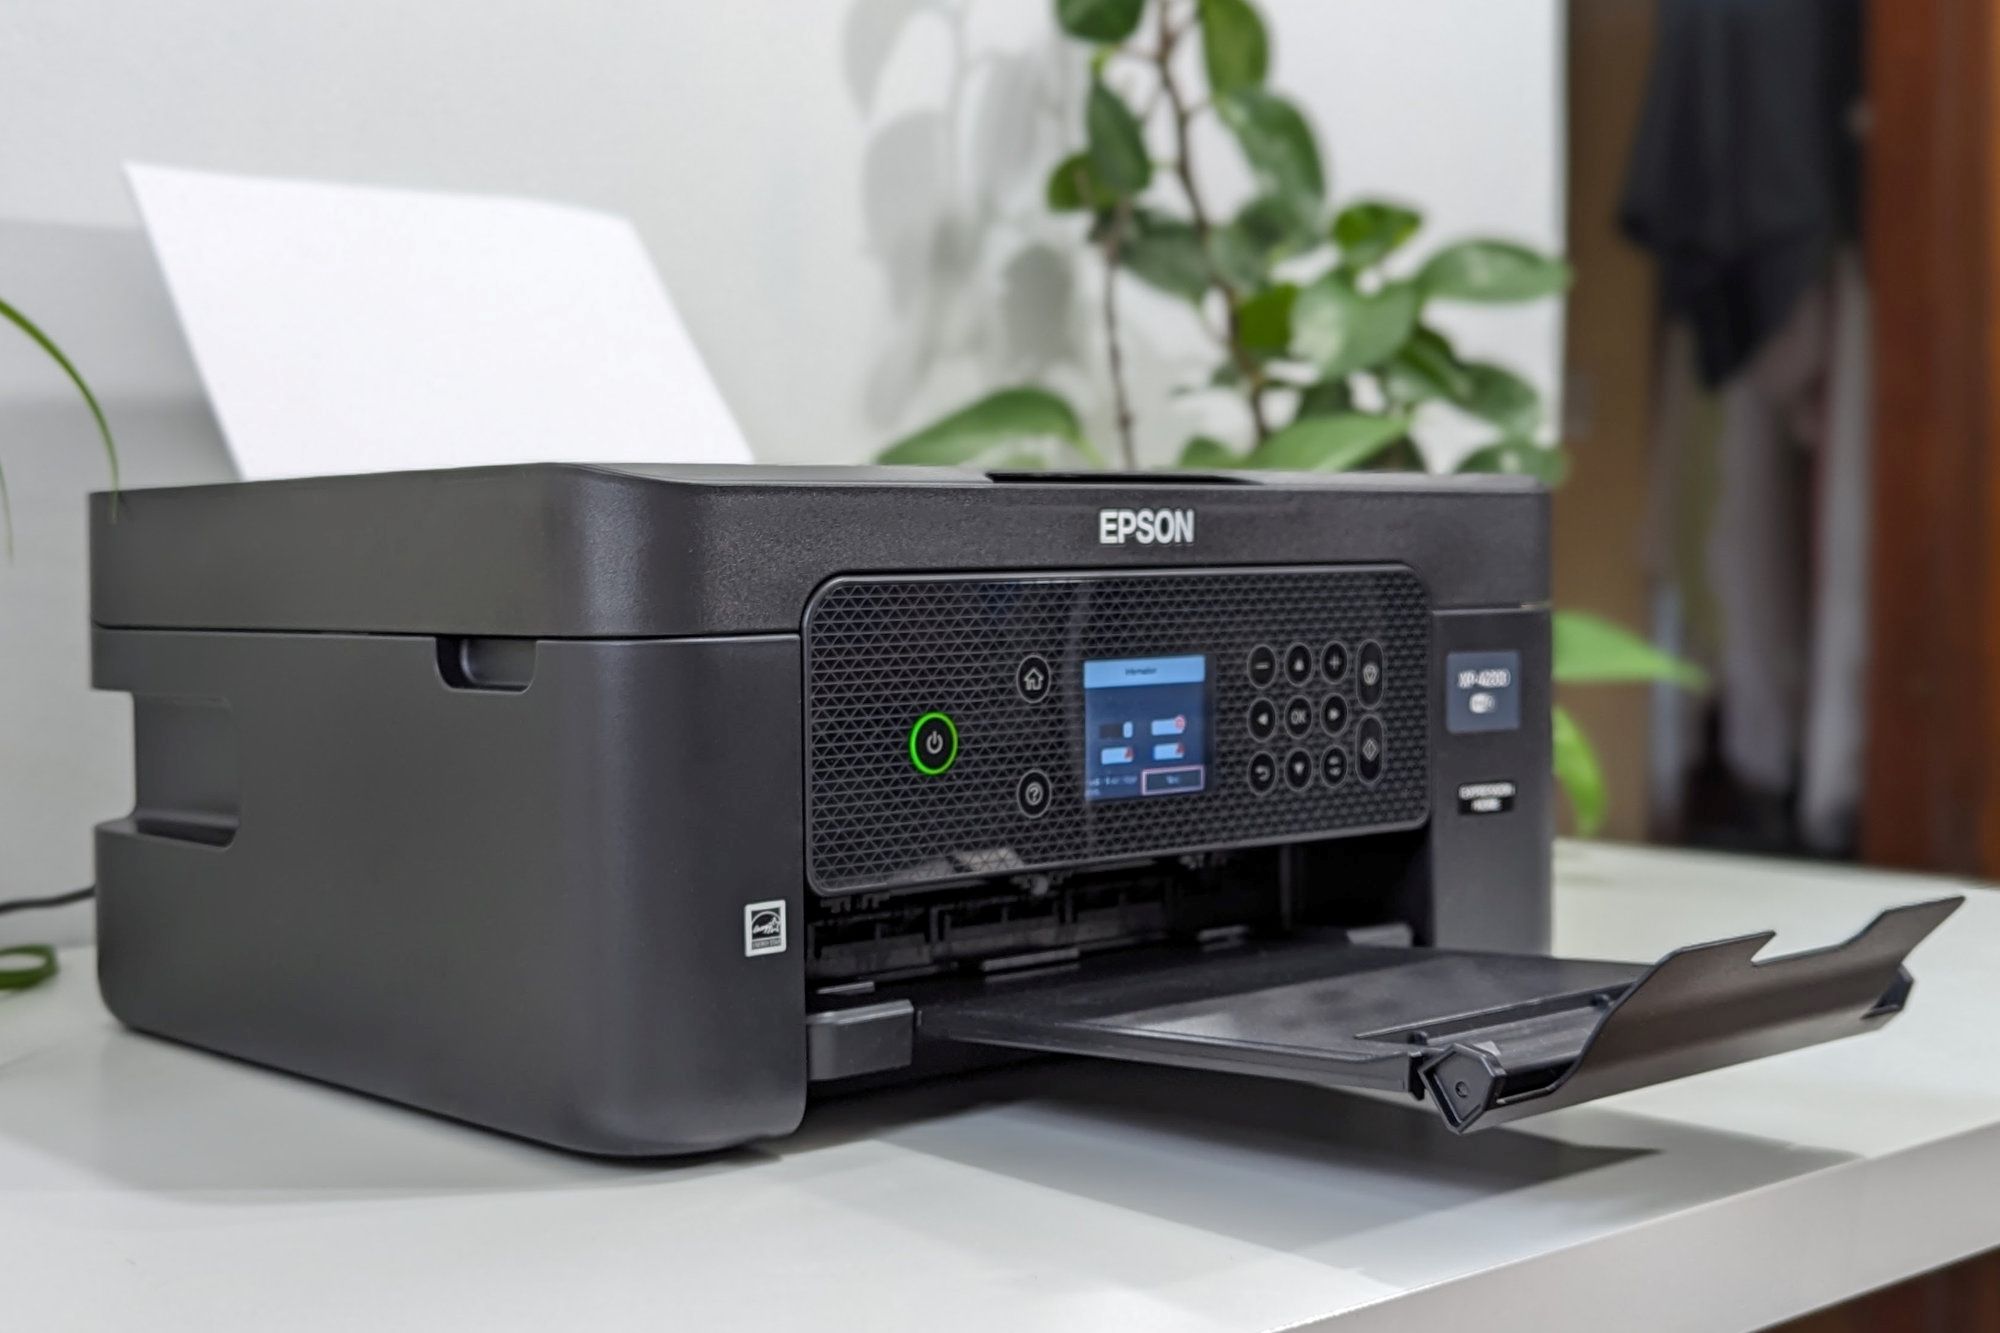 How To Connect An Epson Printer To A Phone